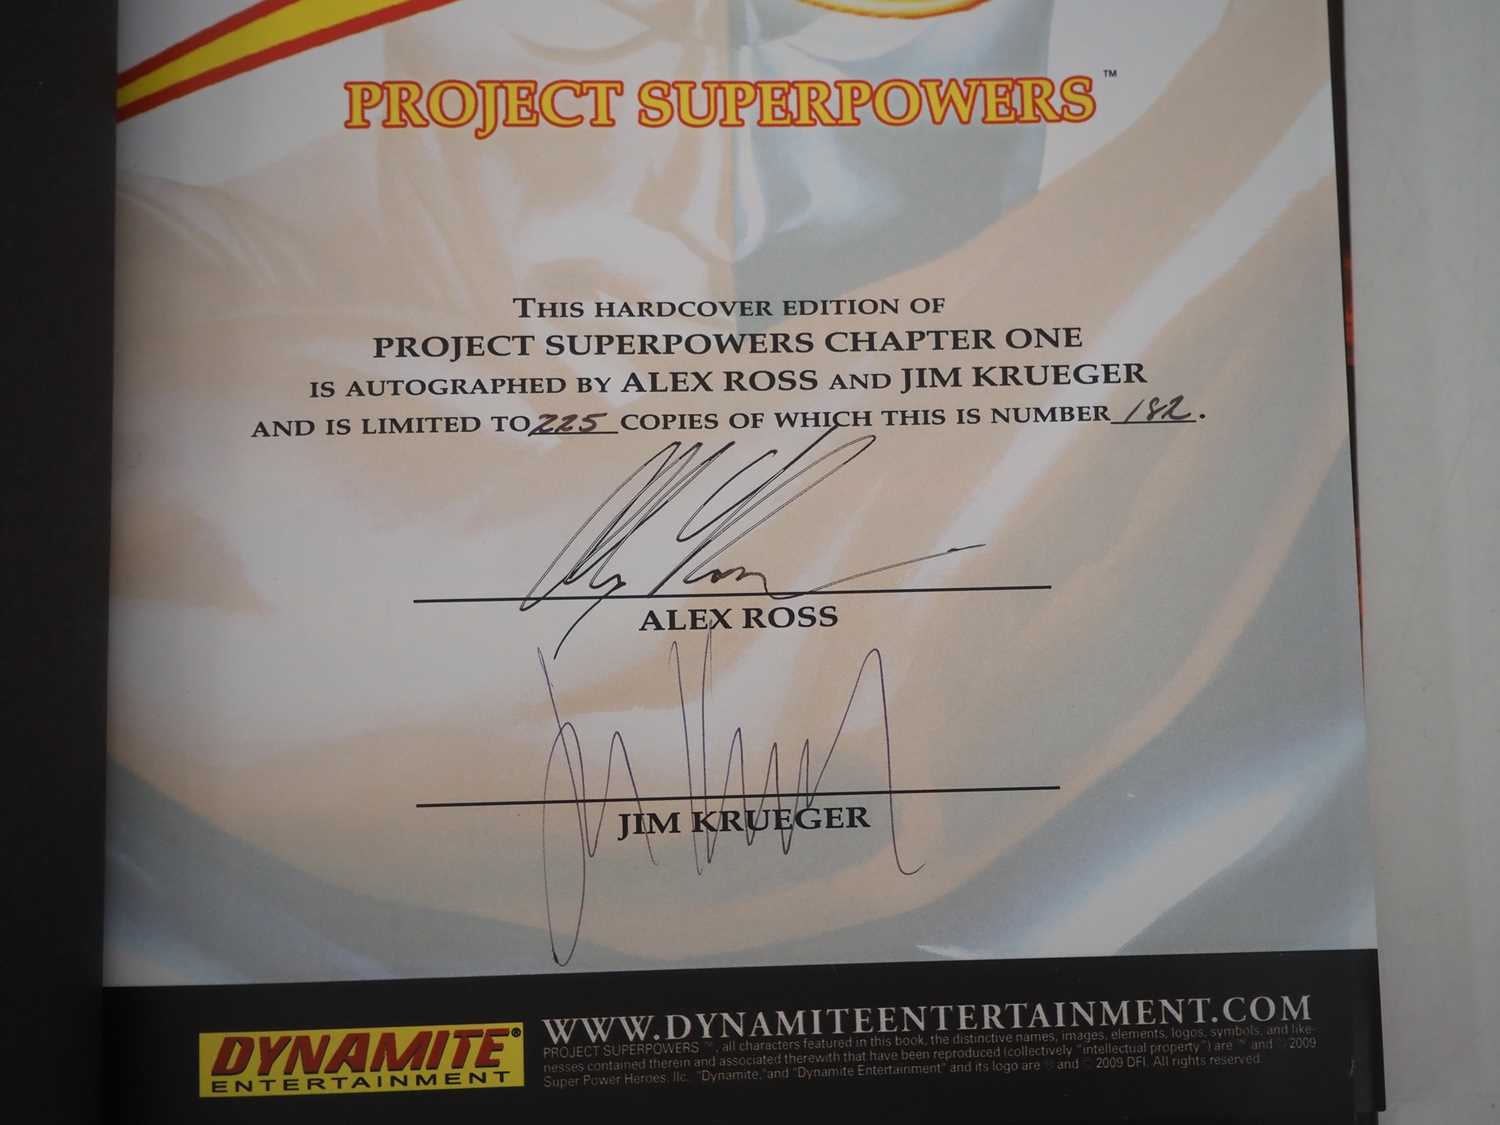 PROJECT SUPERPOWERS CHAPTER ONE (DYNAMIC FORCES DELUXE HARDCOVER) - (2009 - DYNAMITE) - Signed on - Image 3 of 3